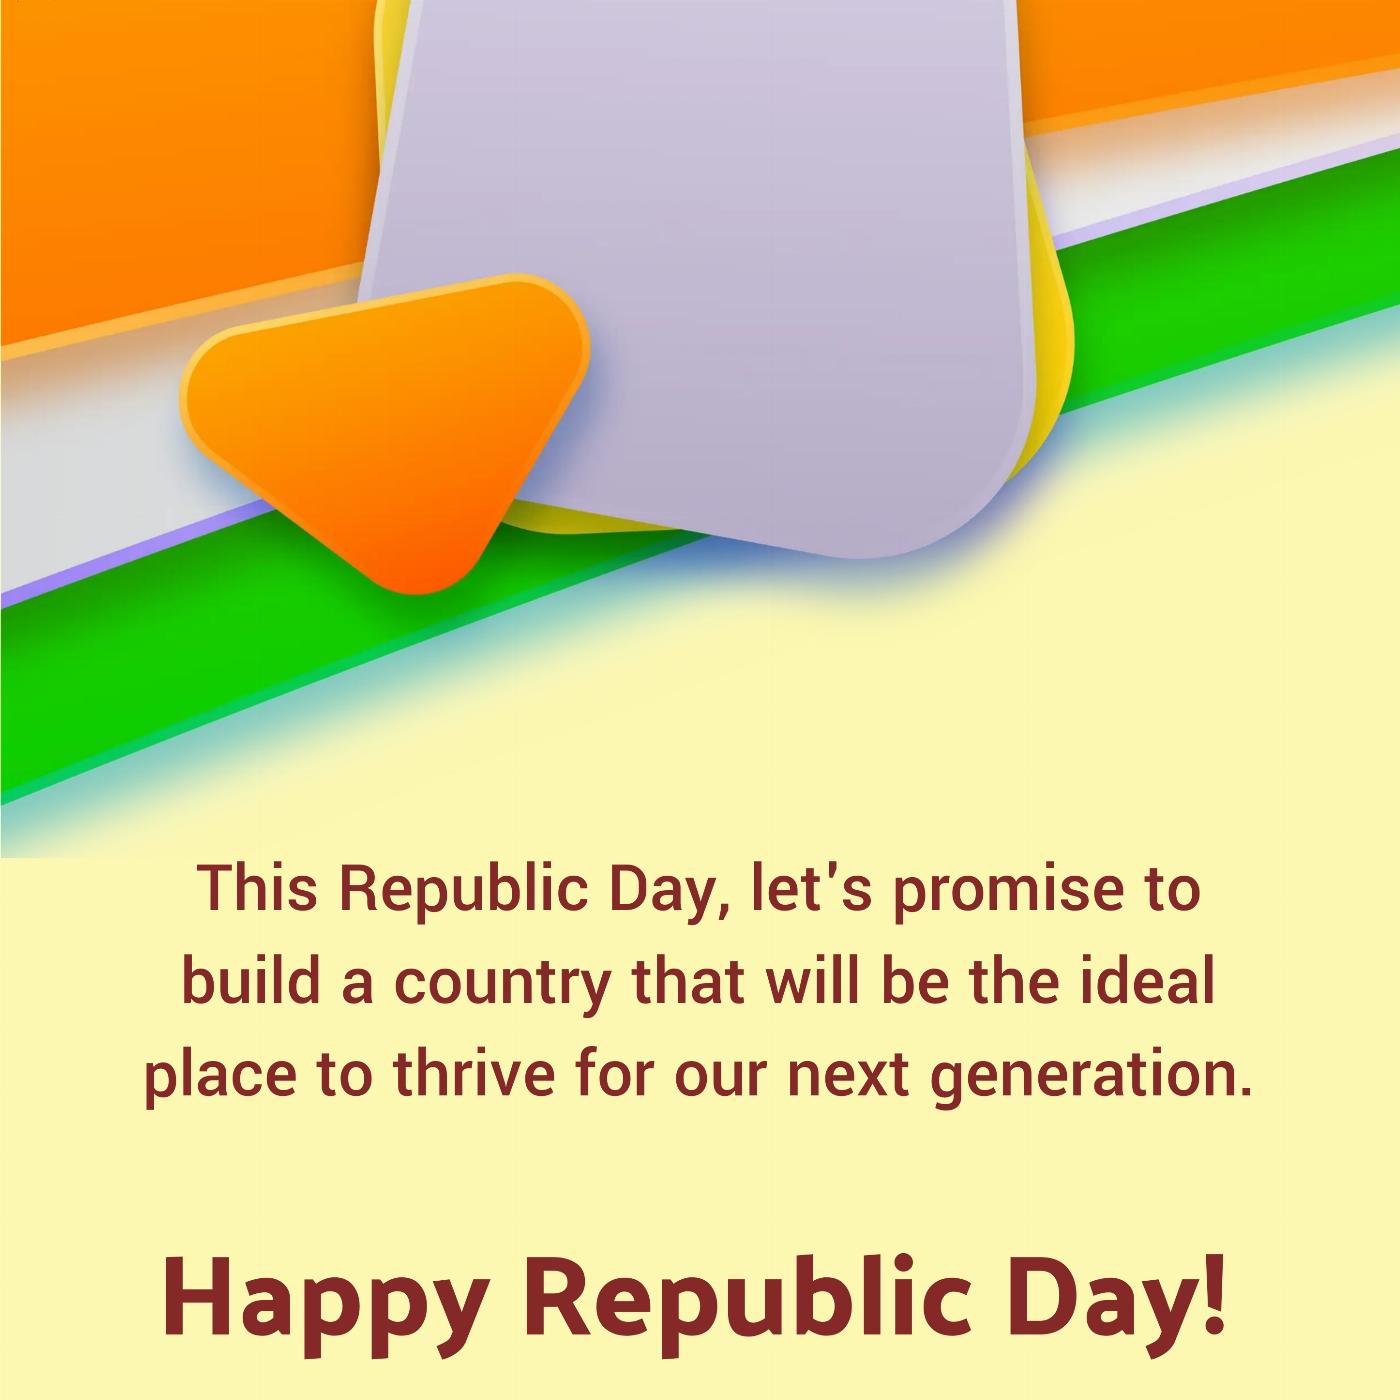 This Republic Day let's promise to build a country